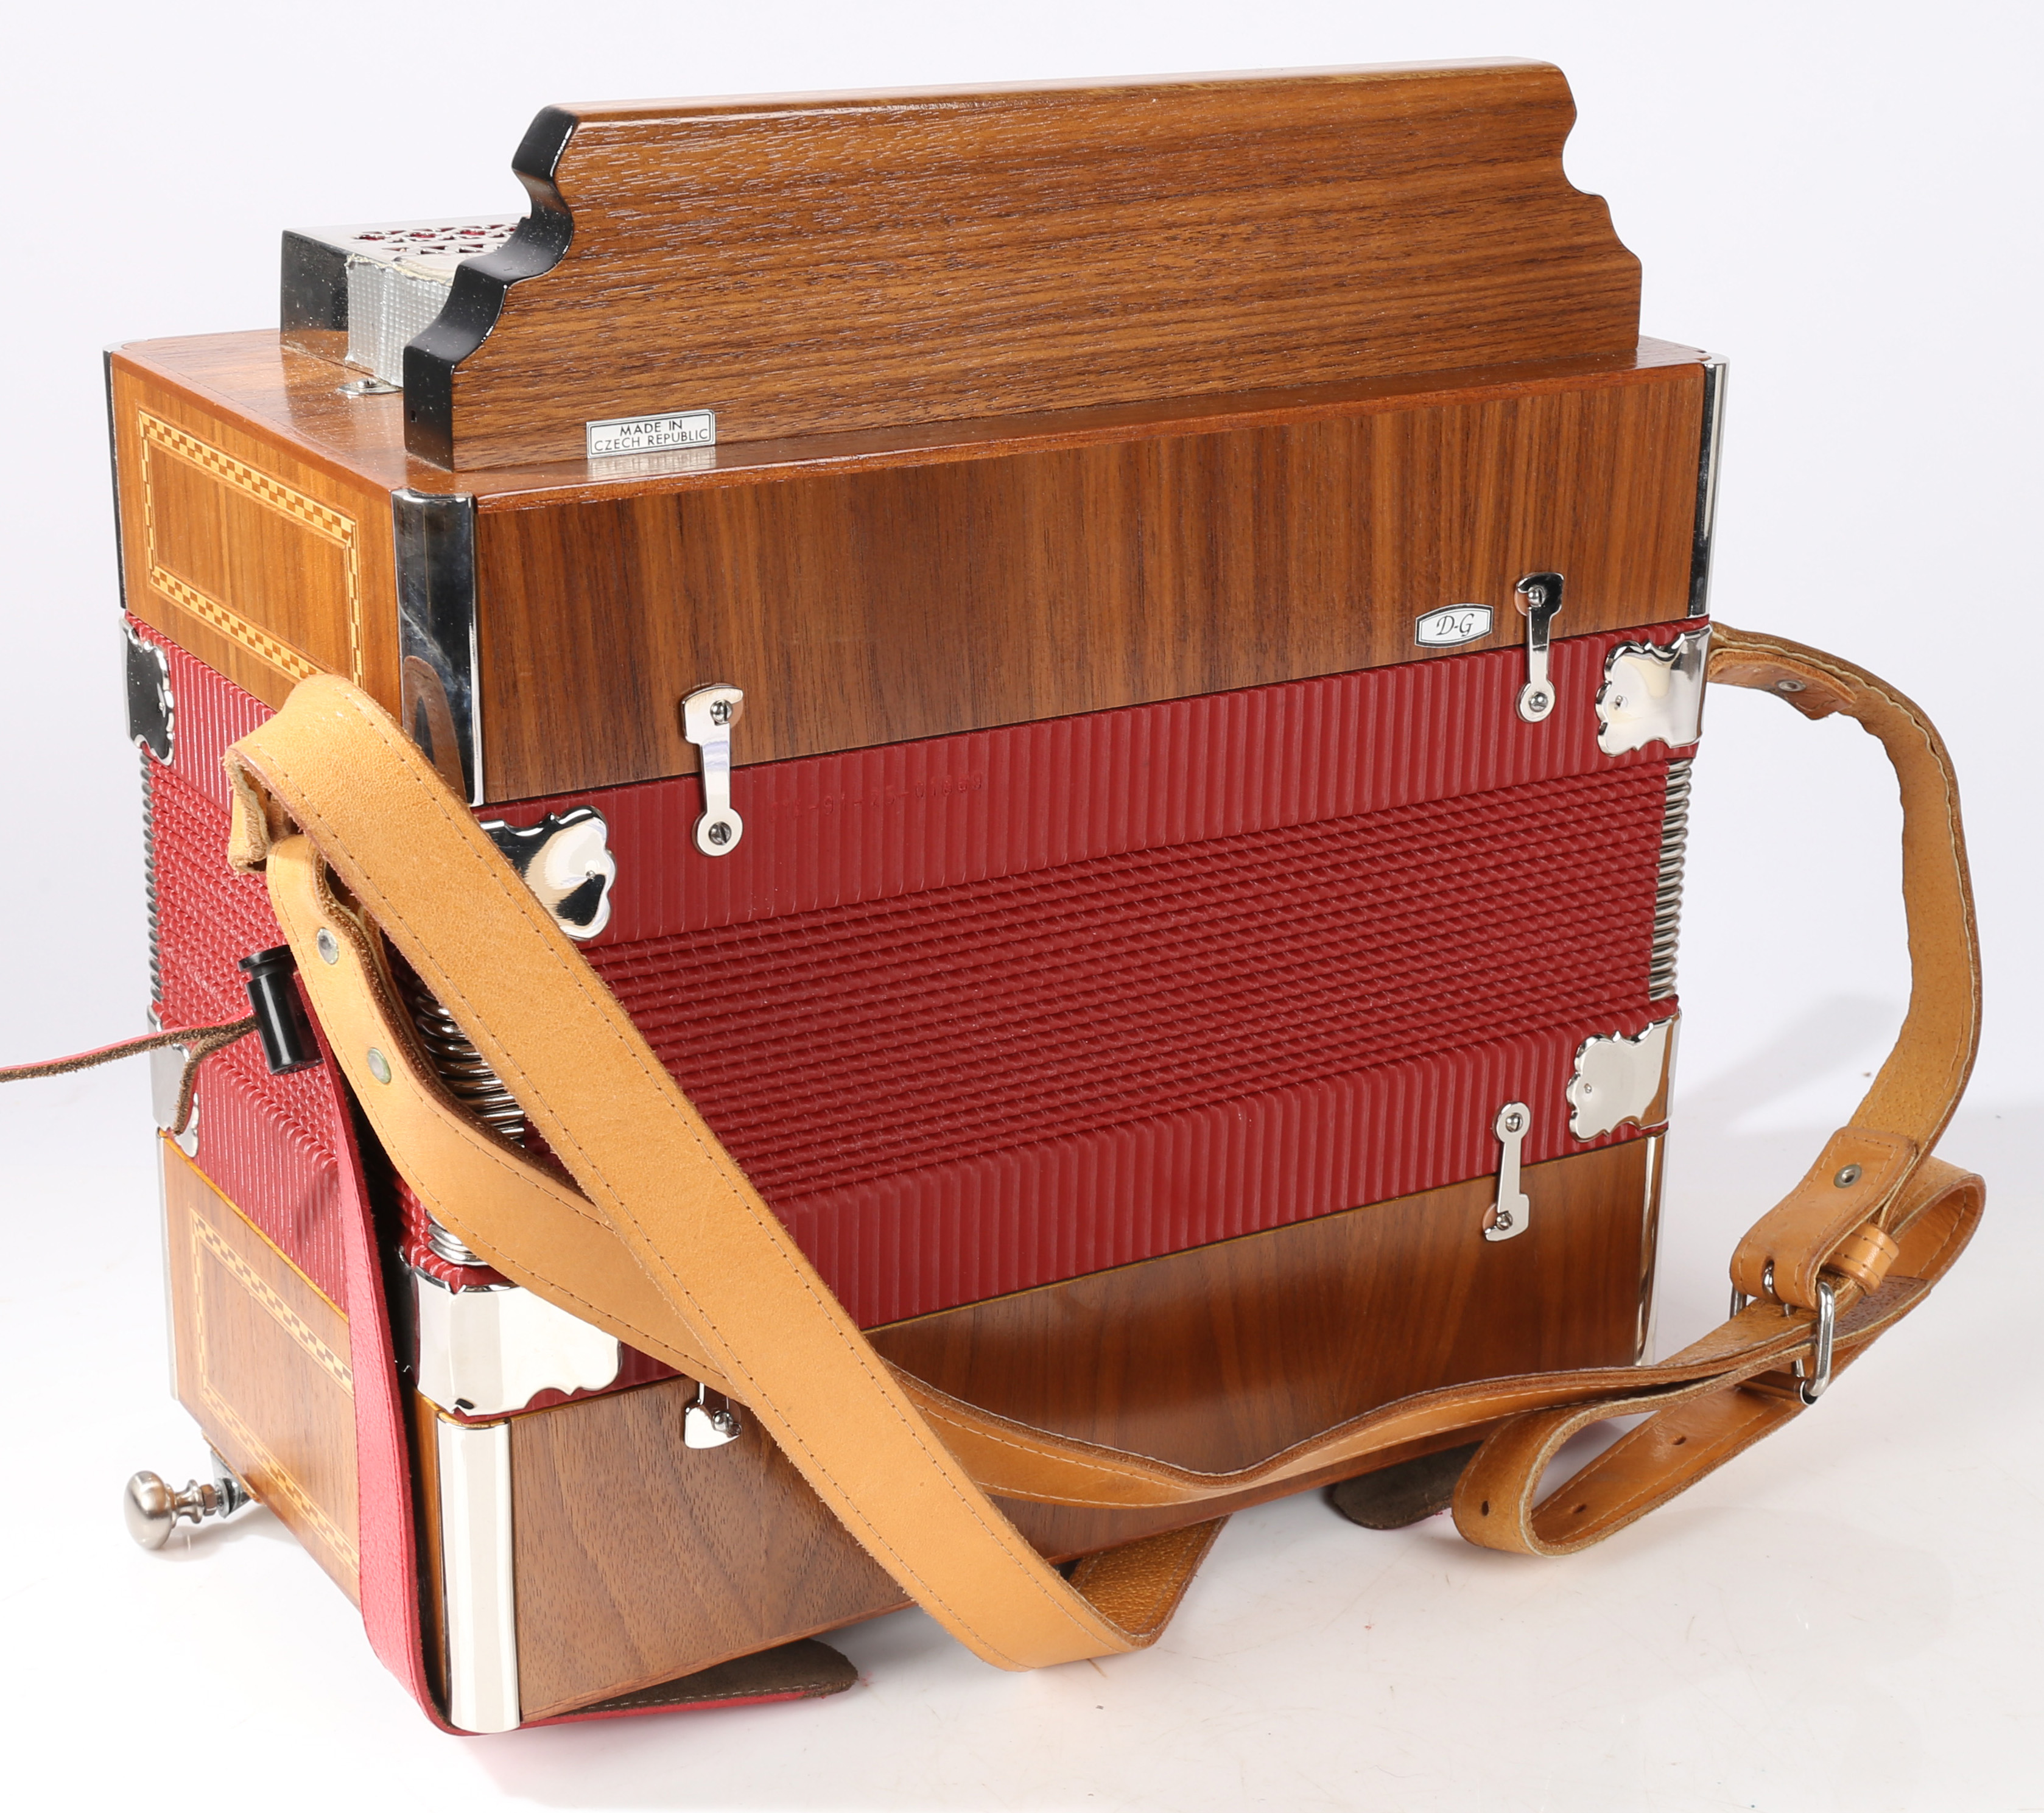 Hlavacek Accordion with soft case, accessories/ tools, and straps. Made in Czech Republic. - Image 5 of 10